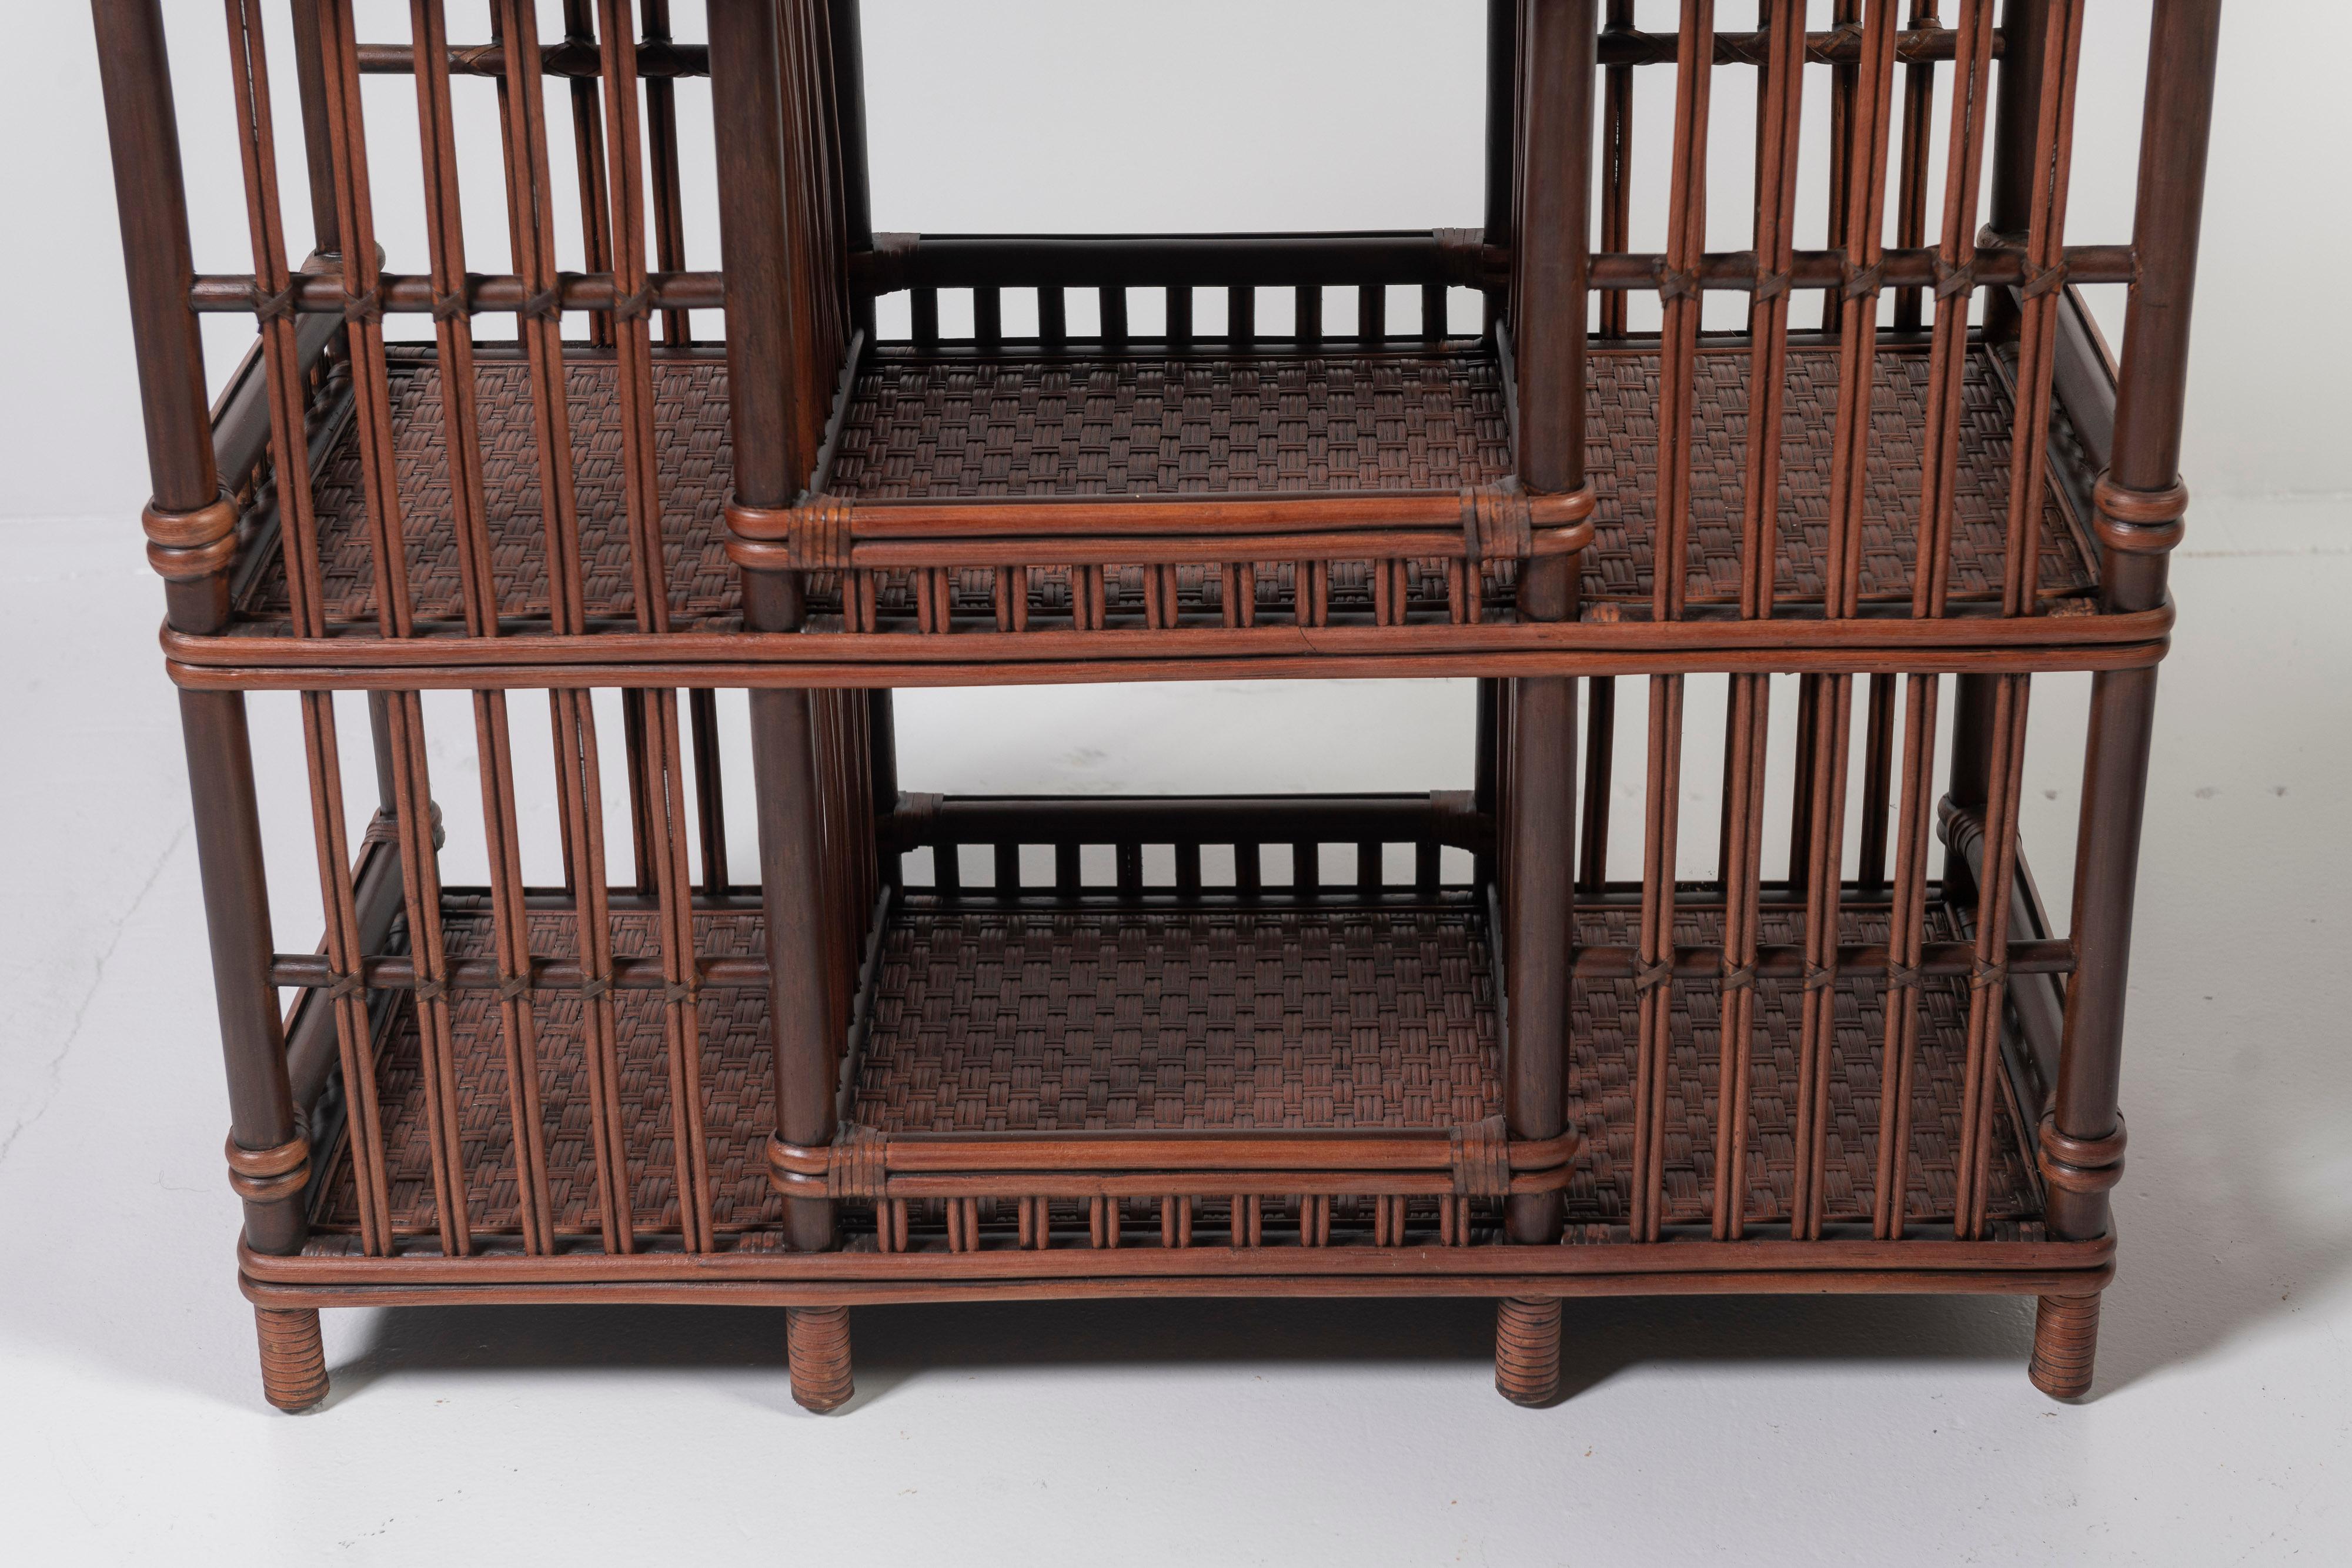 Two Williamsburg Coffee Finish Wicker Tiki Bars, Etegeres or Bookcases 1